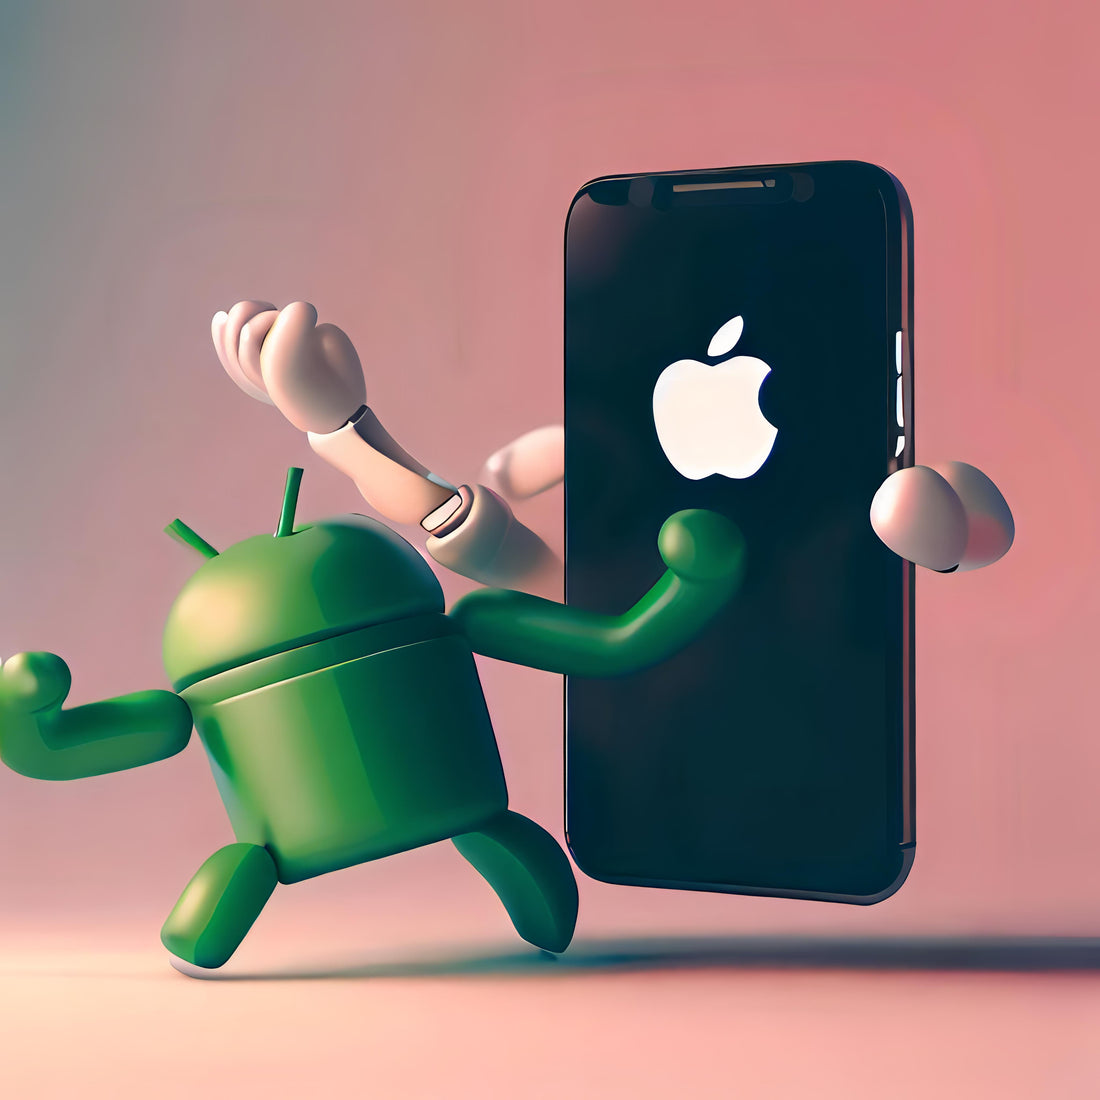 The Great Smartphone Debate: iPhone vs. Android Ecosystem